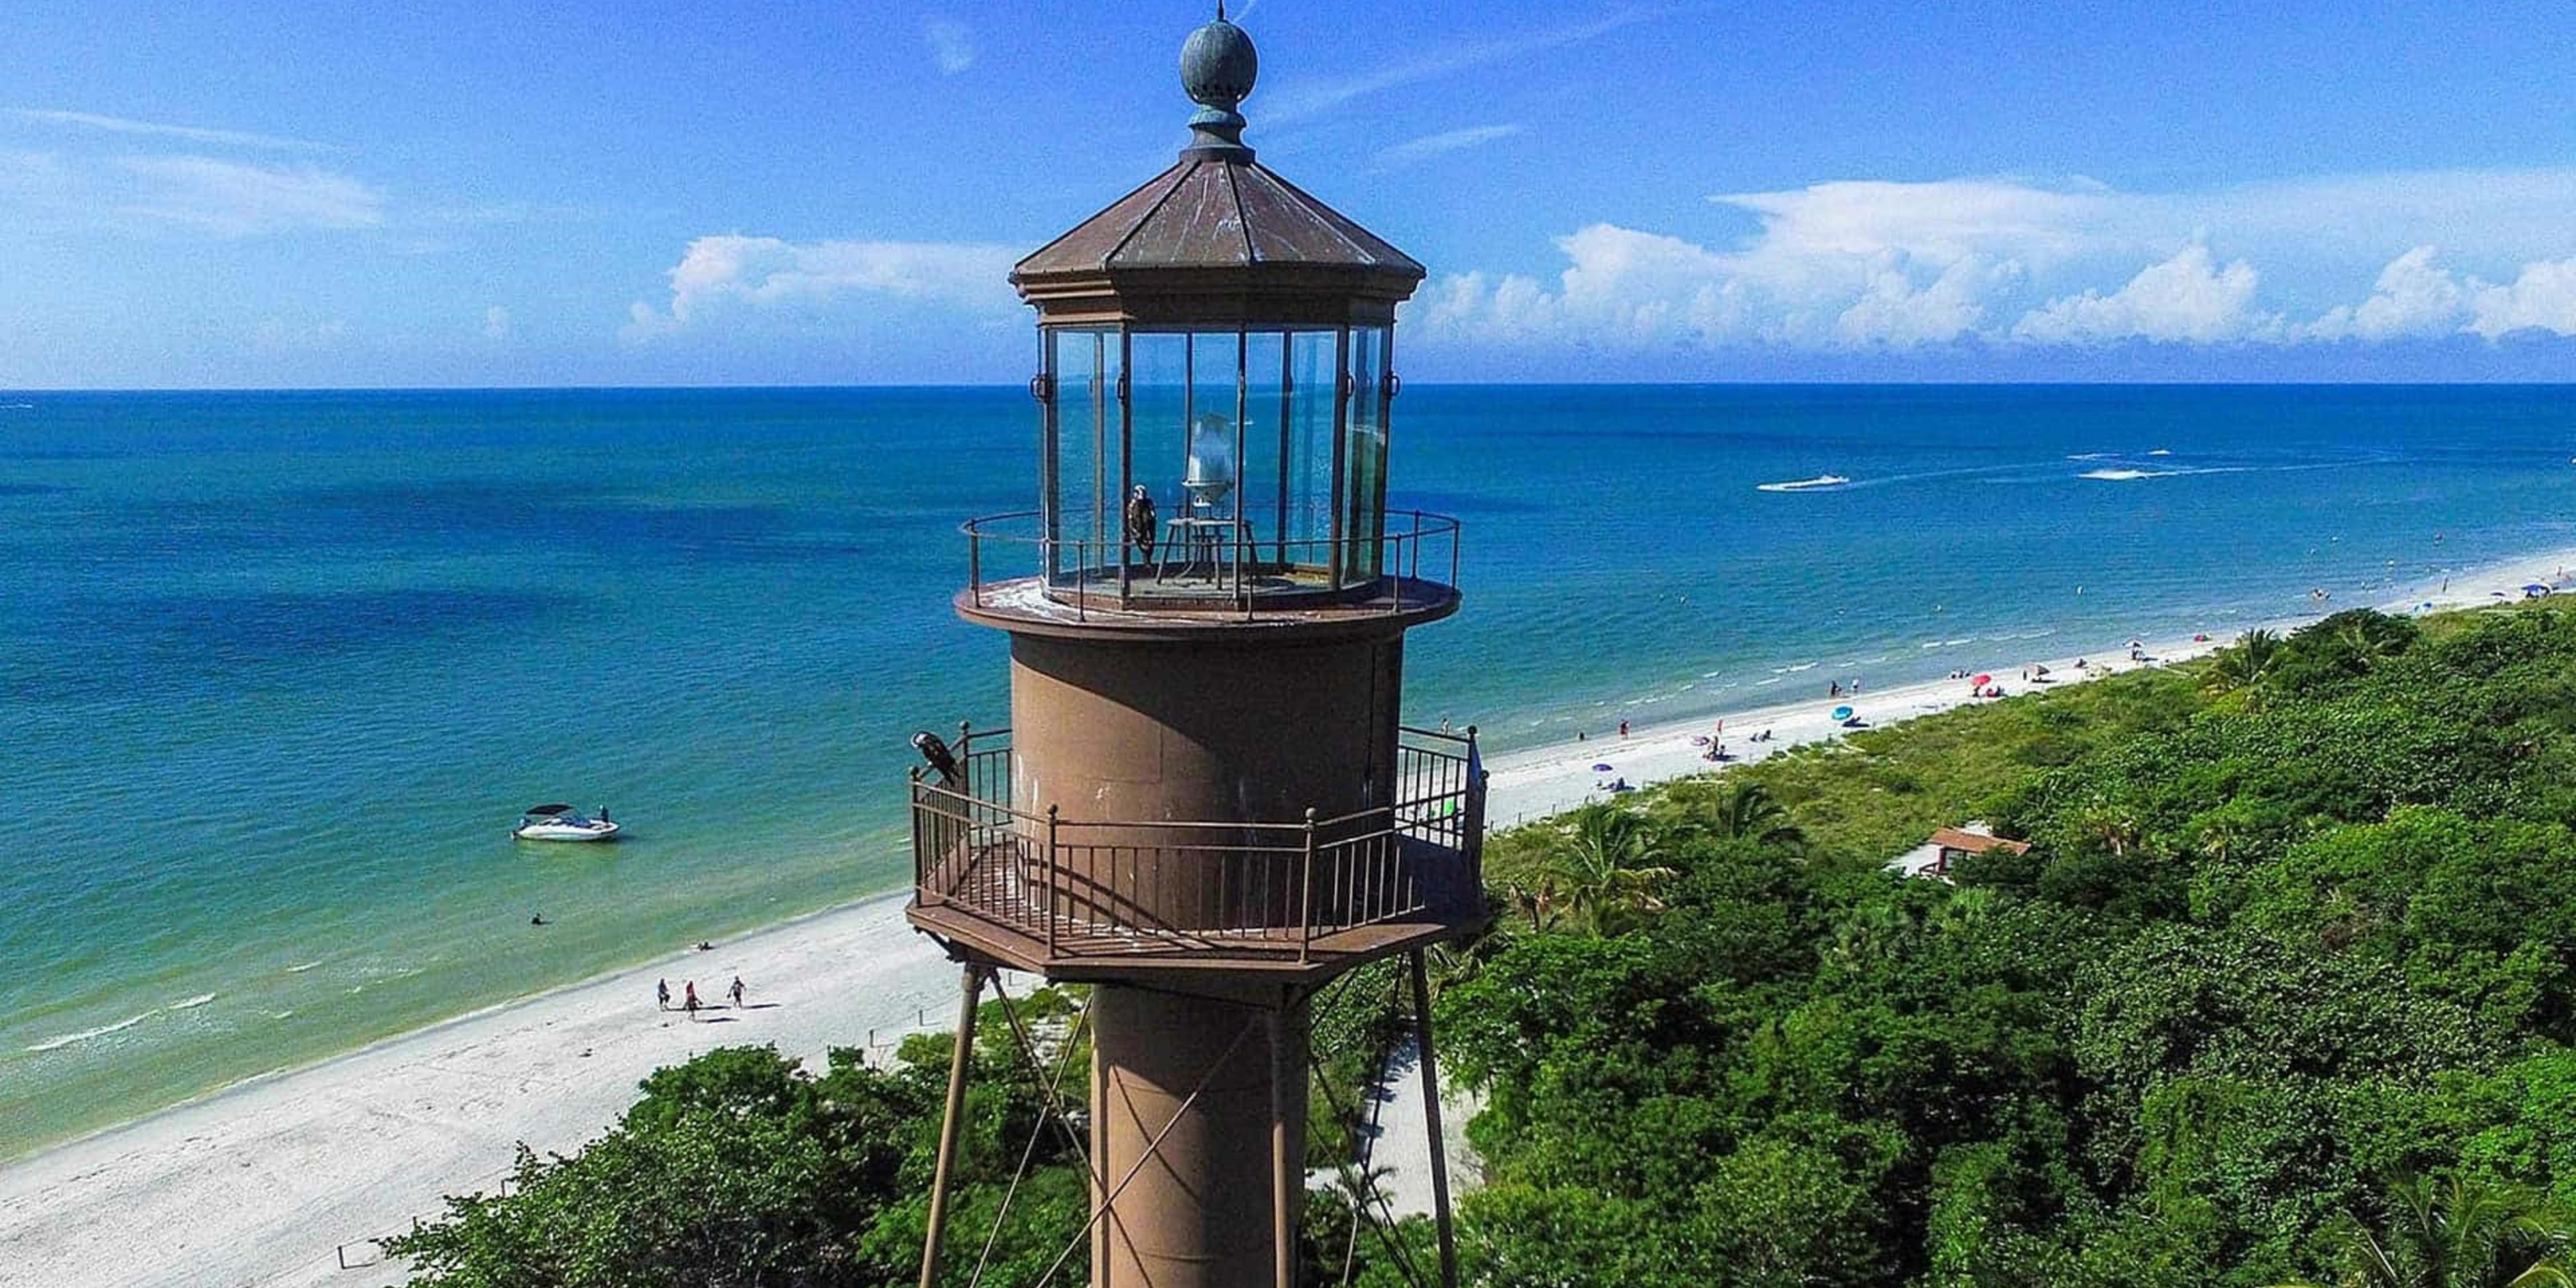 Explore everything Sanibel and Estero have to offer - shopping, restaurants, shelling, and the lighthouse.